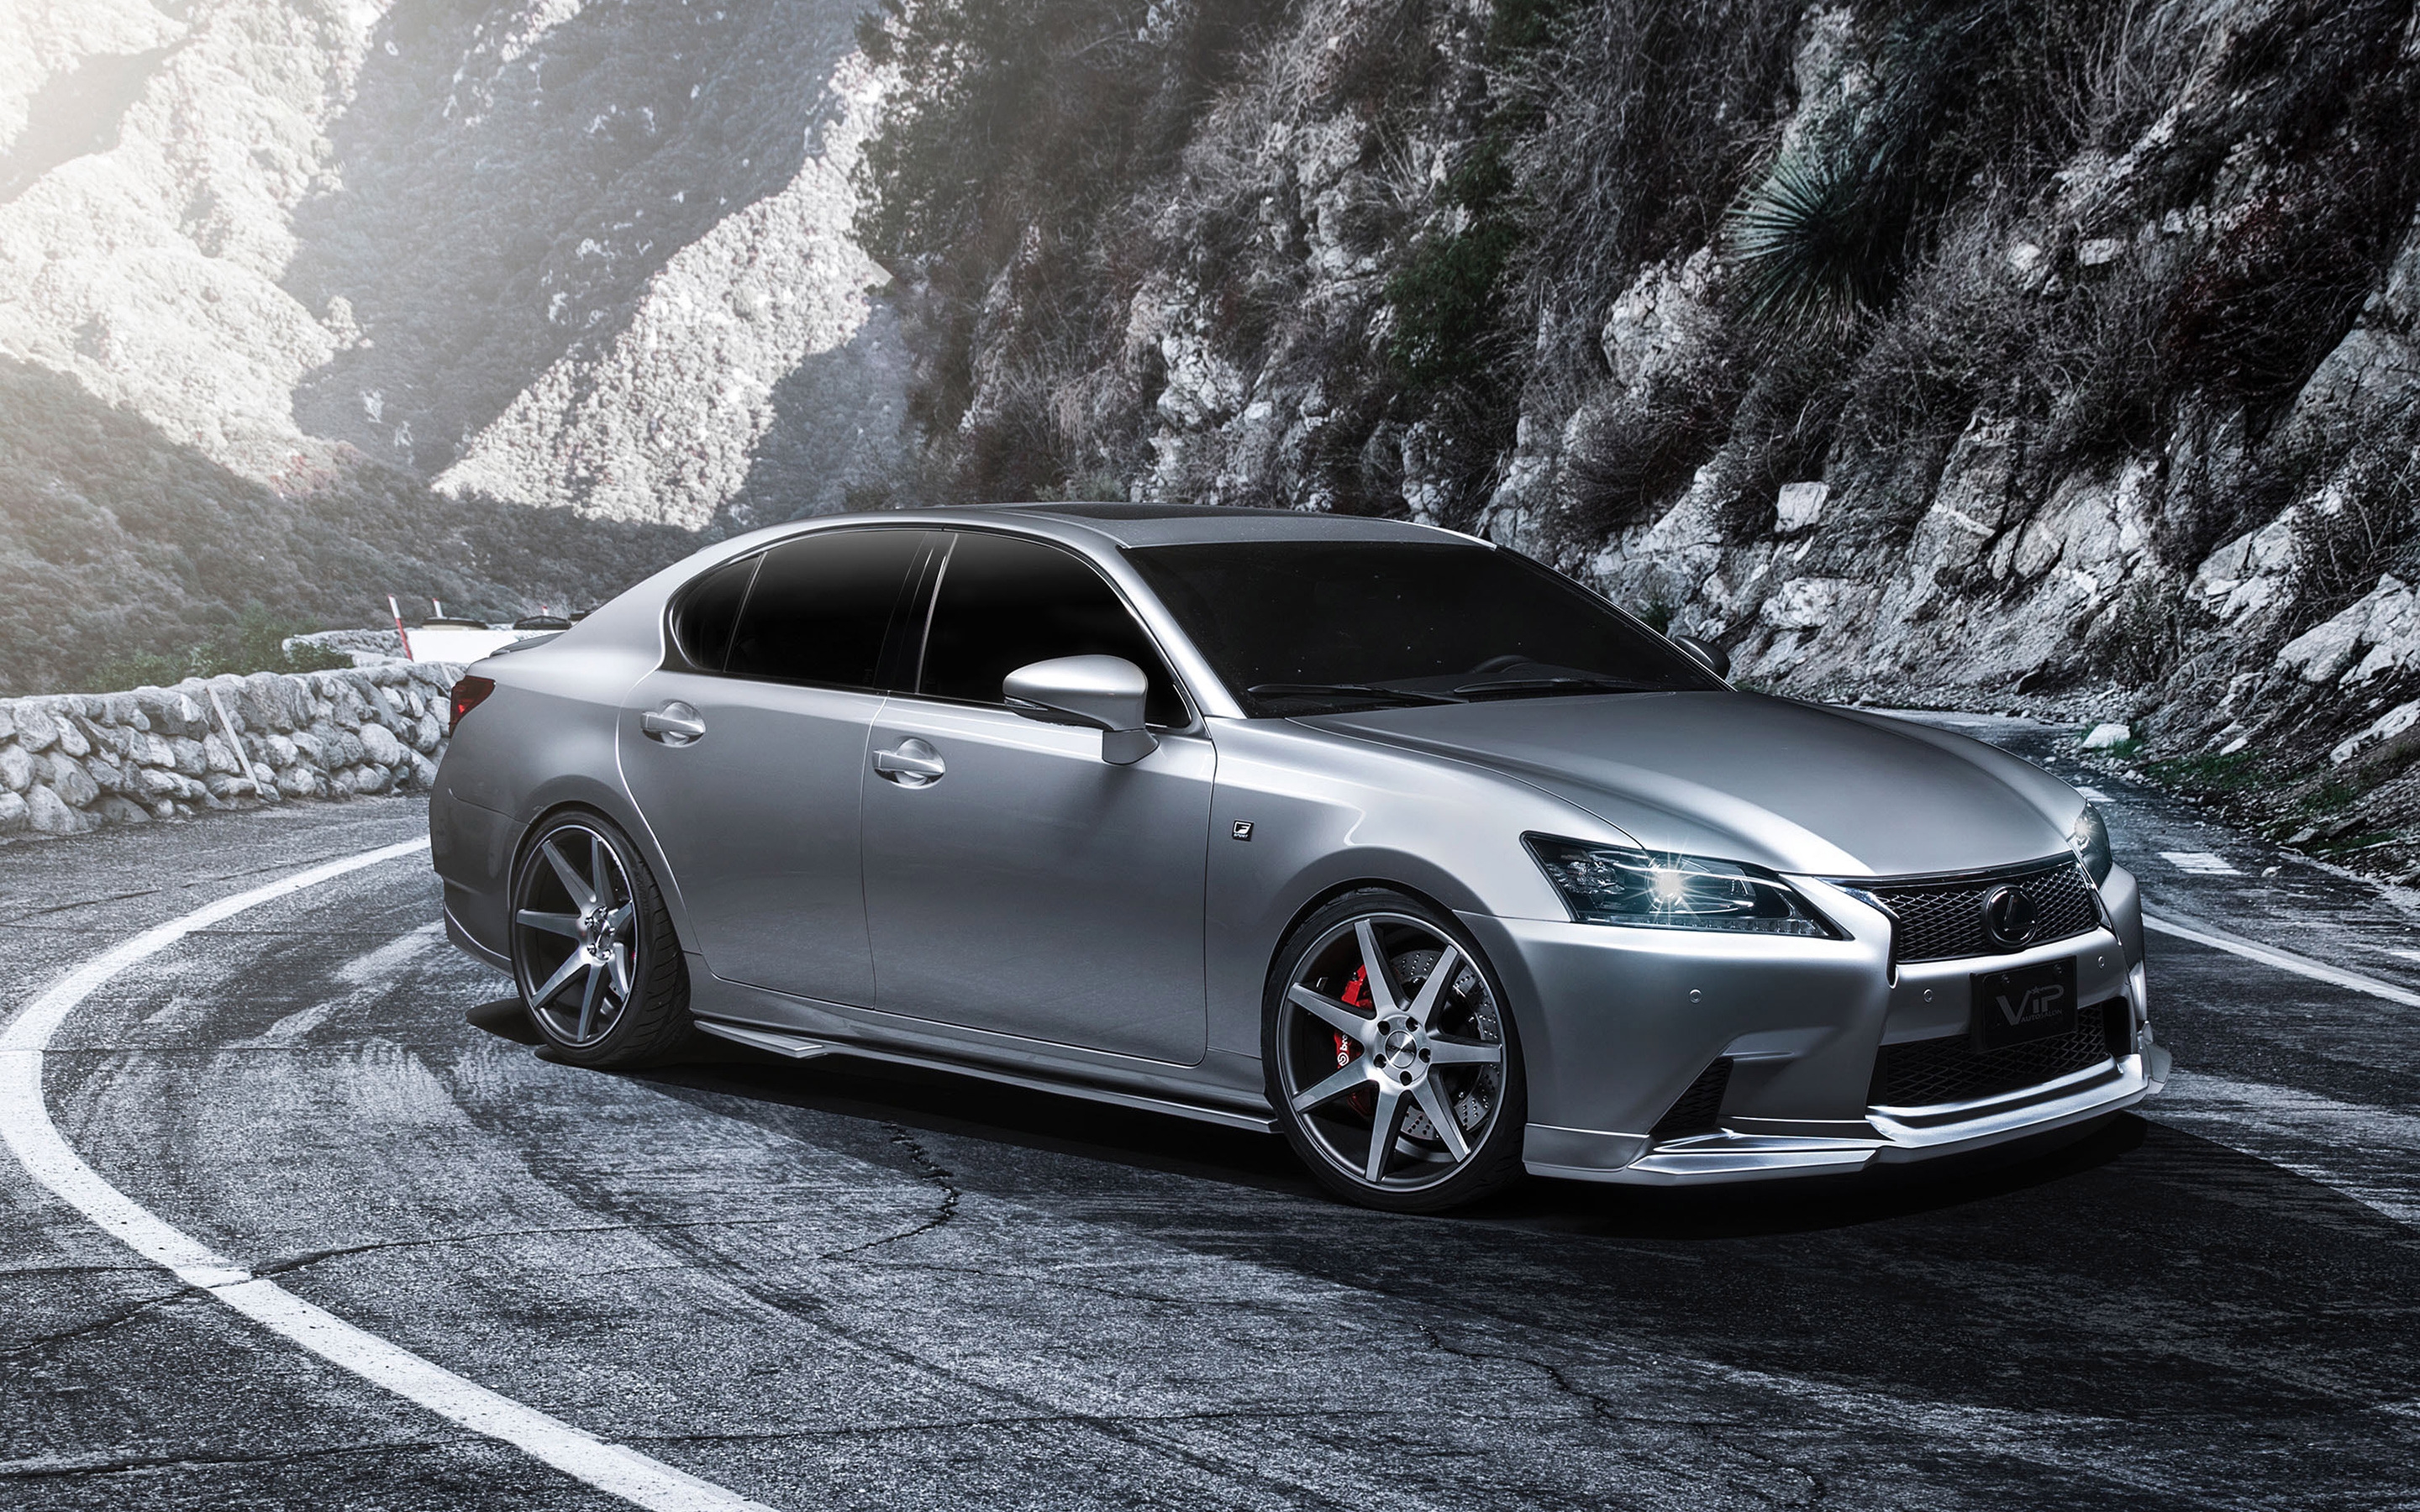 Supercharged 2013 Lexus GS 350 for 2880 x 1800 Retina Display resolution